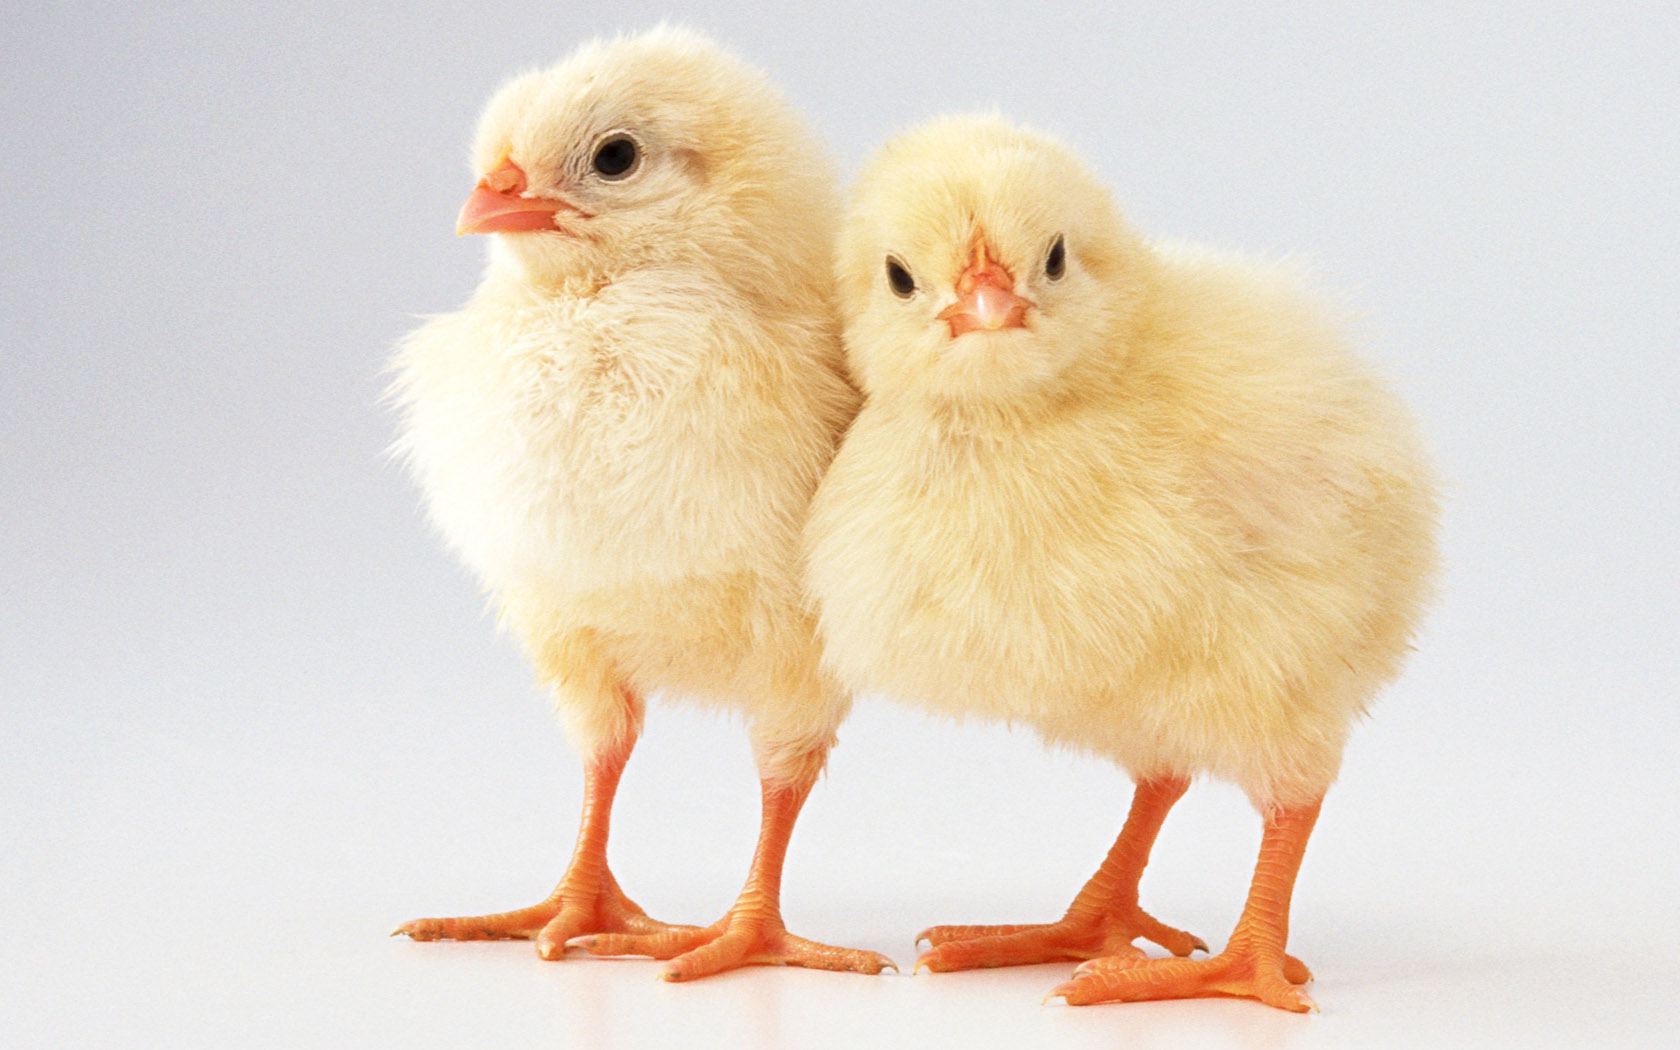 Baby Chicks Vitamin Deficiency And Chickens